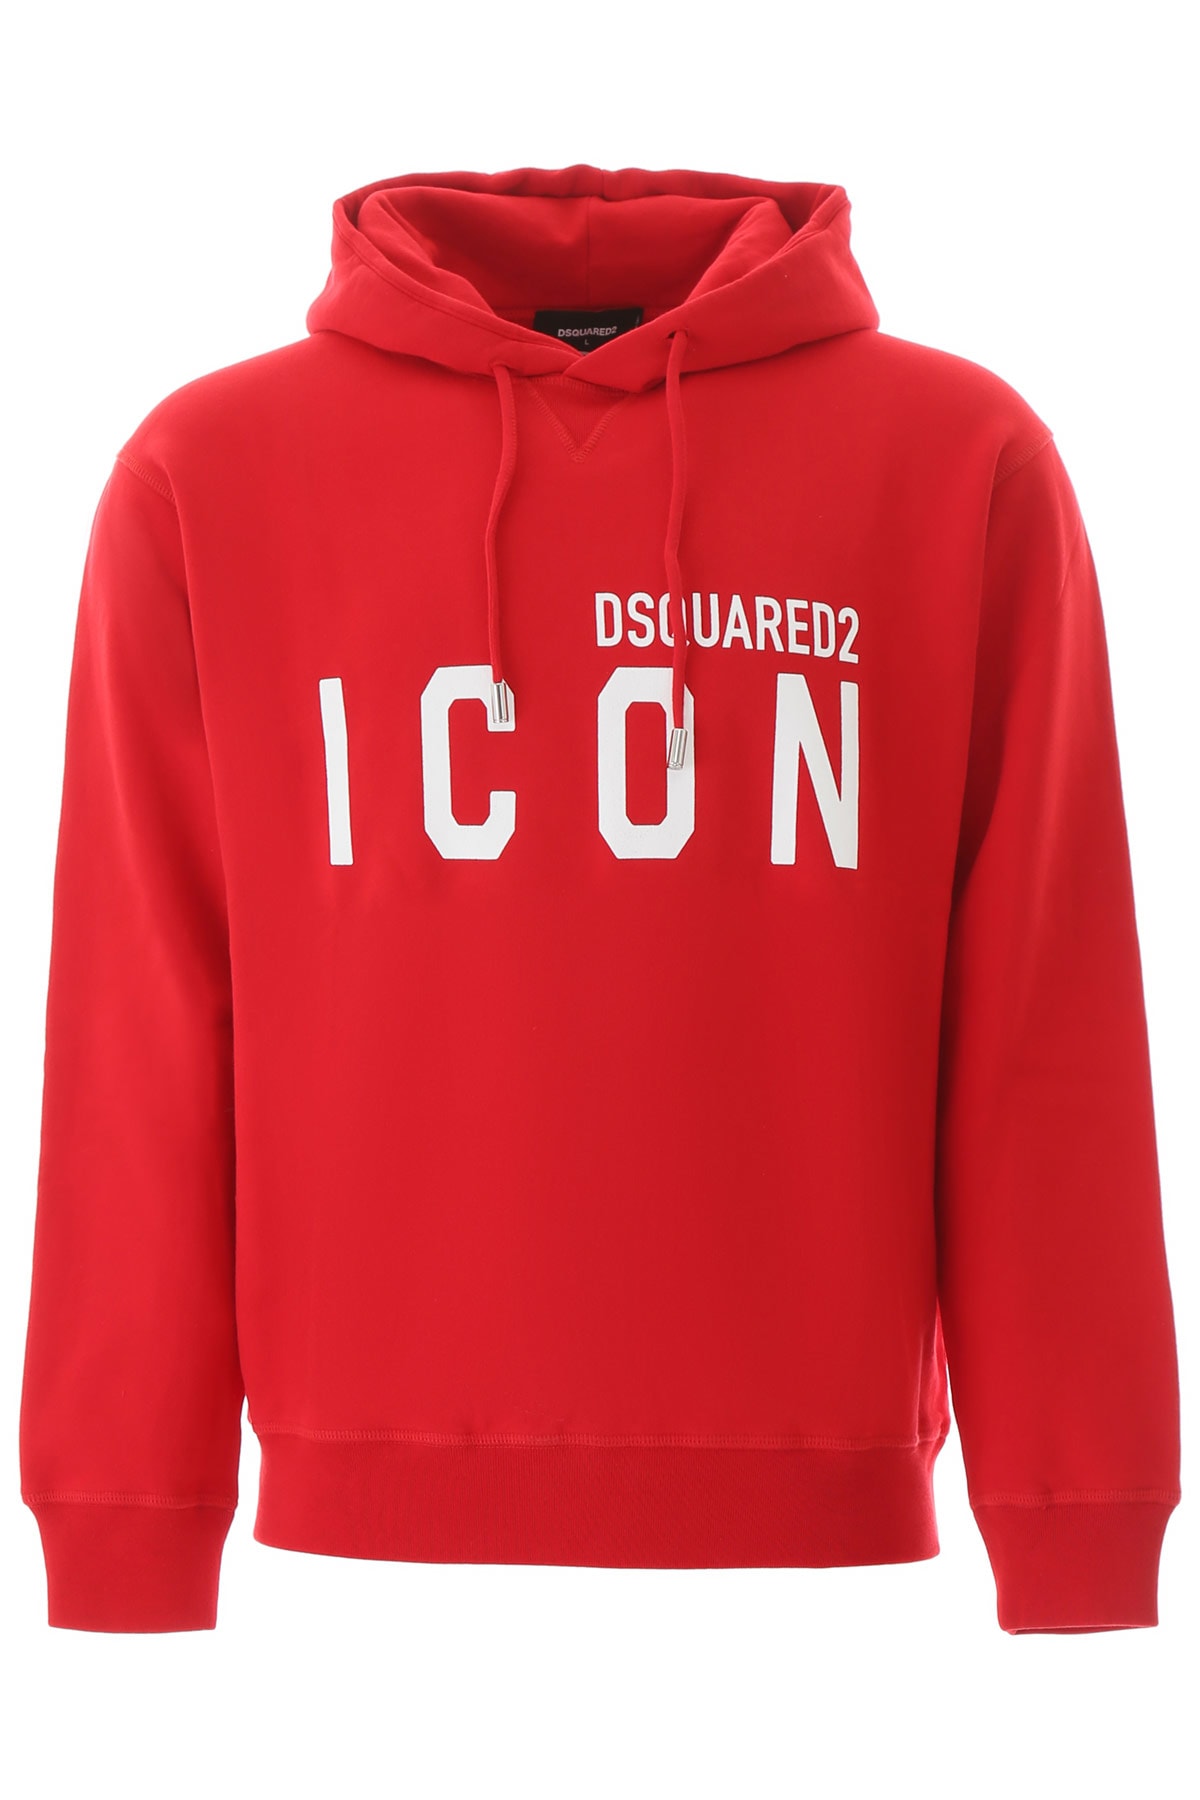 DSQUARED2 ICON HOODIE,11316323